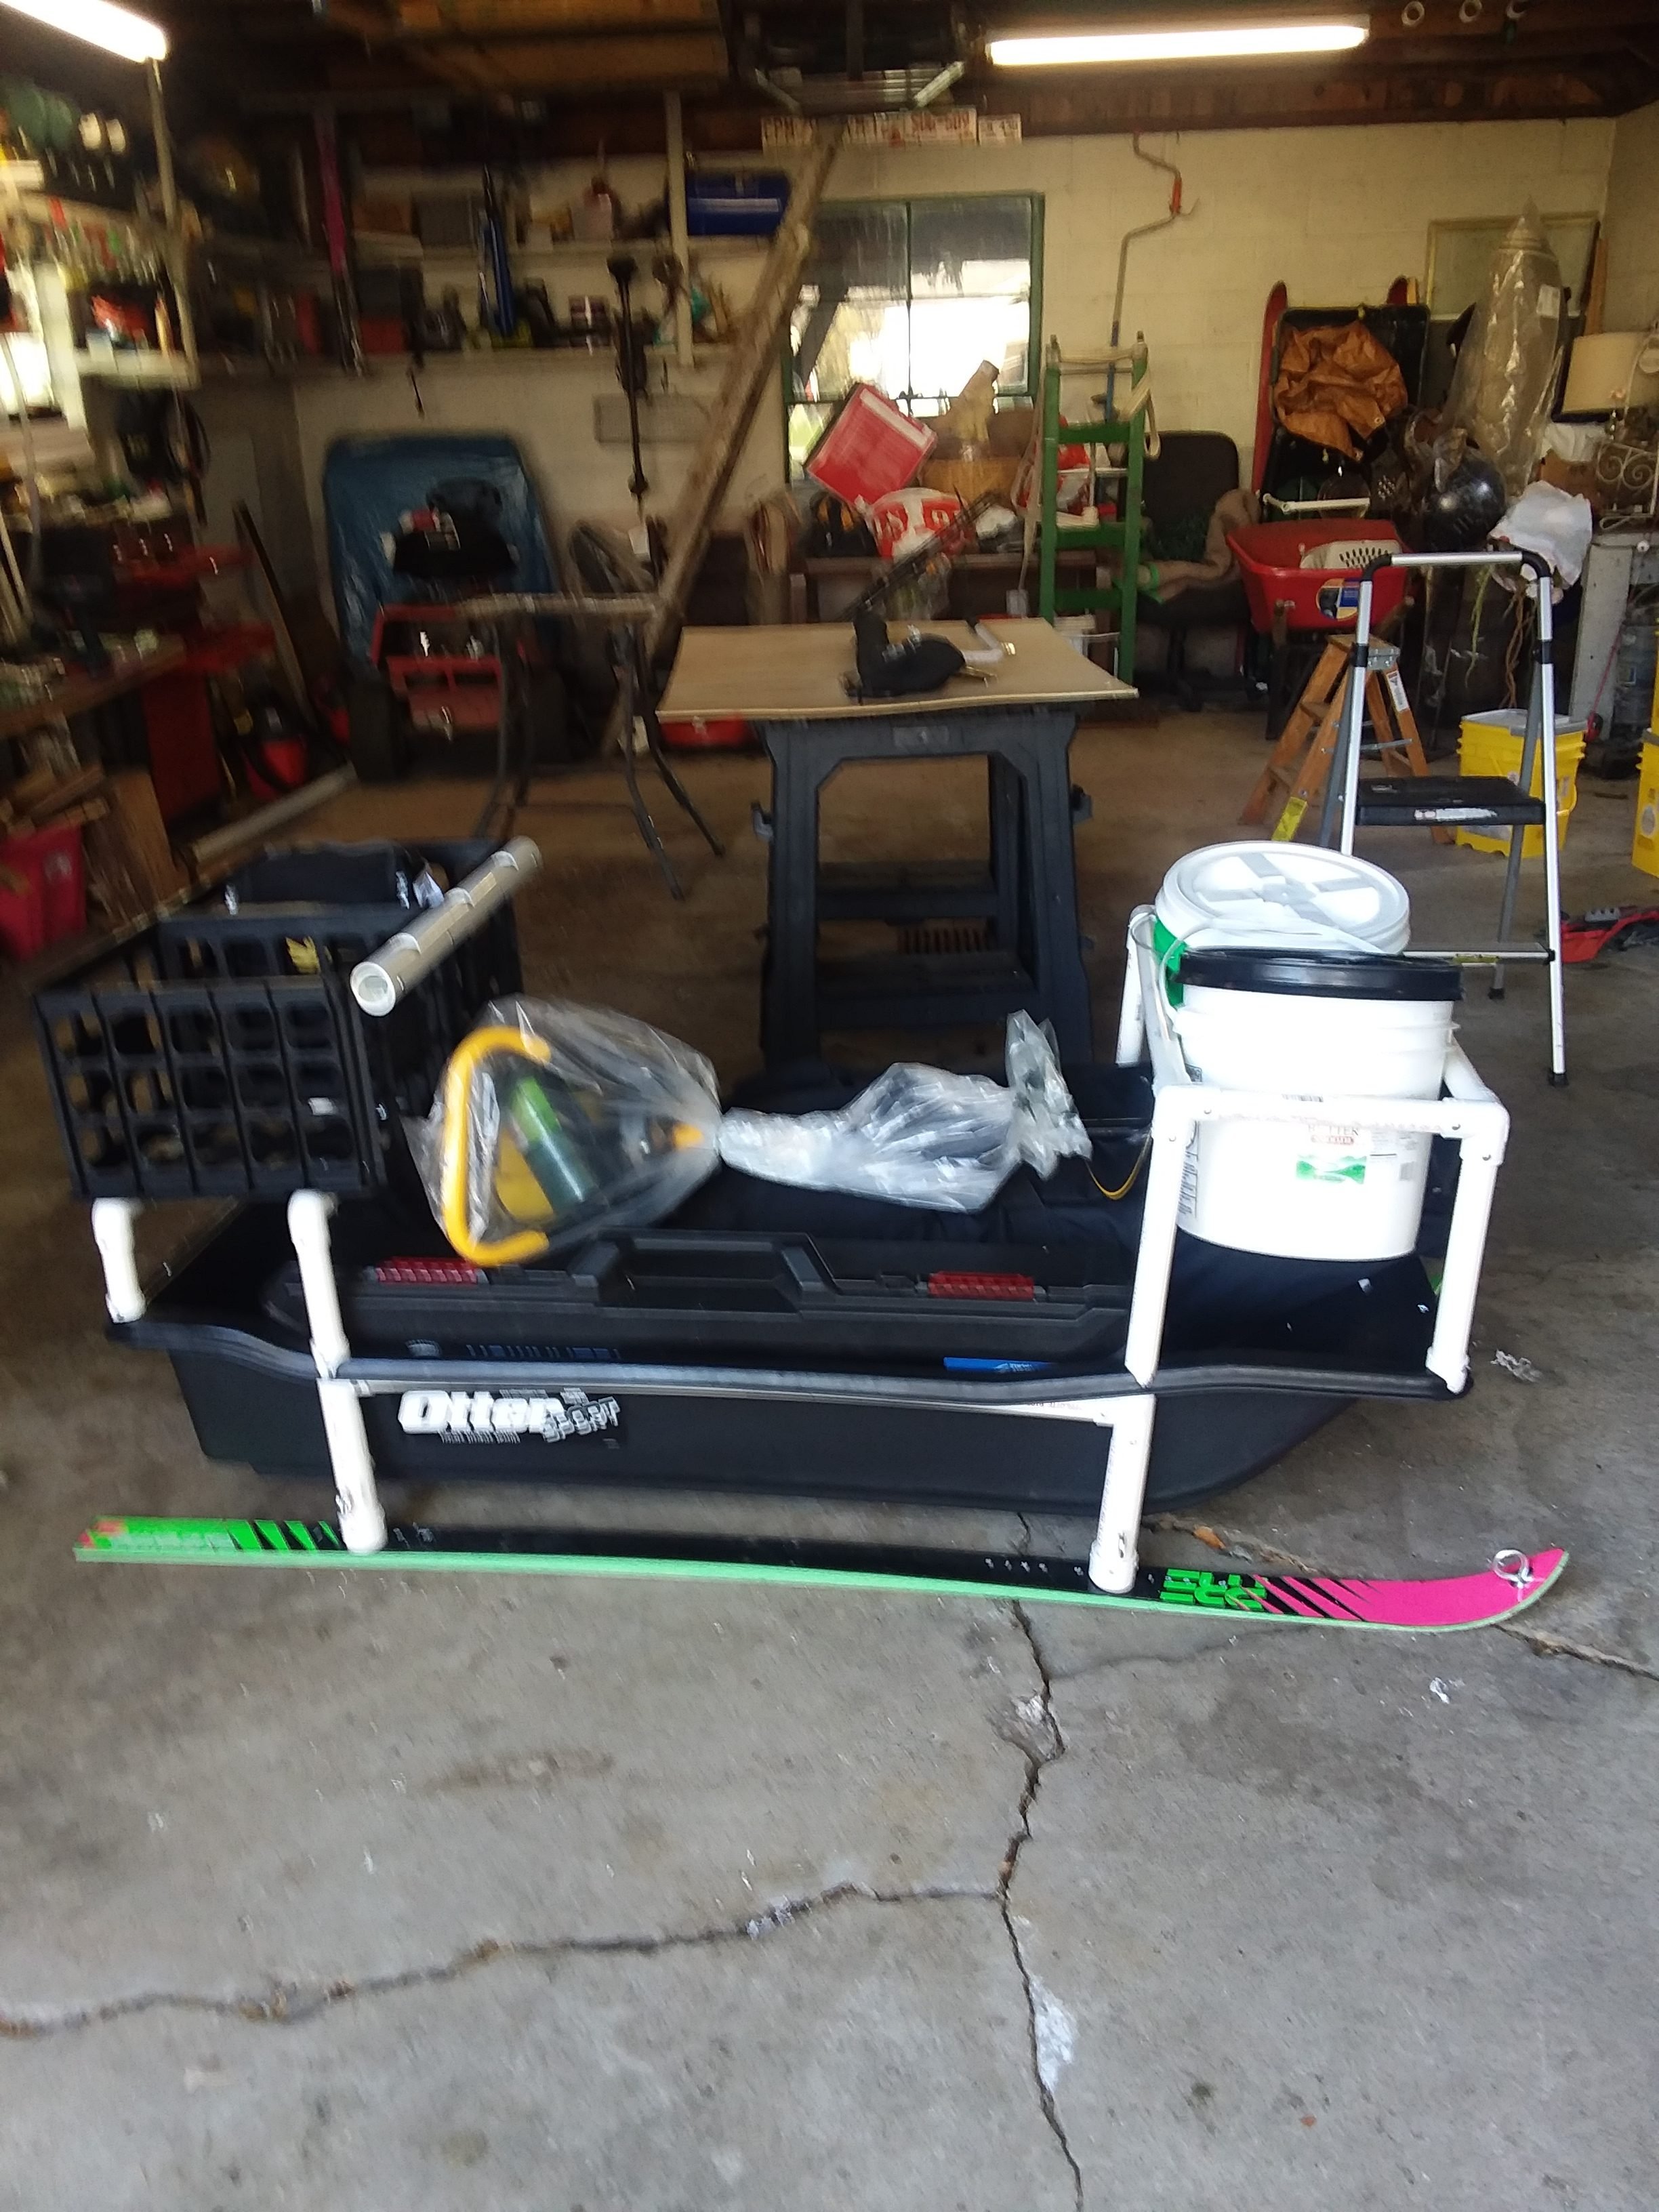 Reasonable Size & Weight for a Loaded Sled When Walking? - Ice